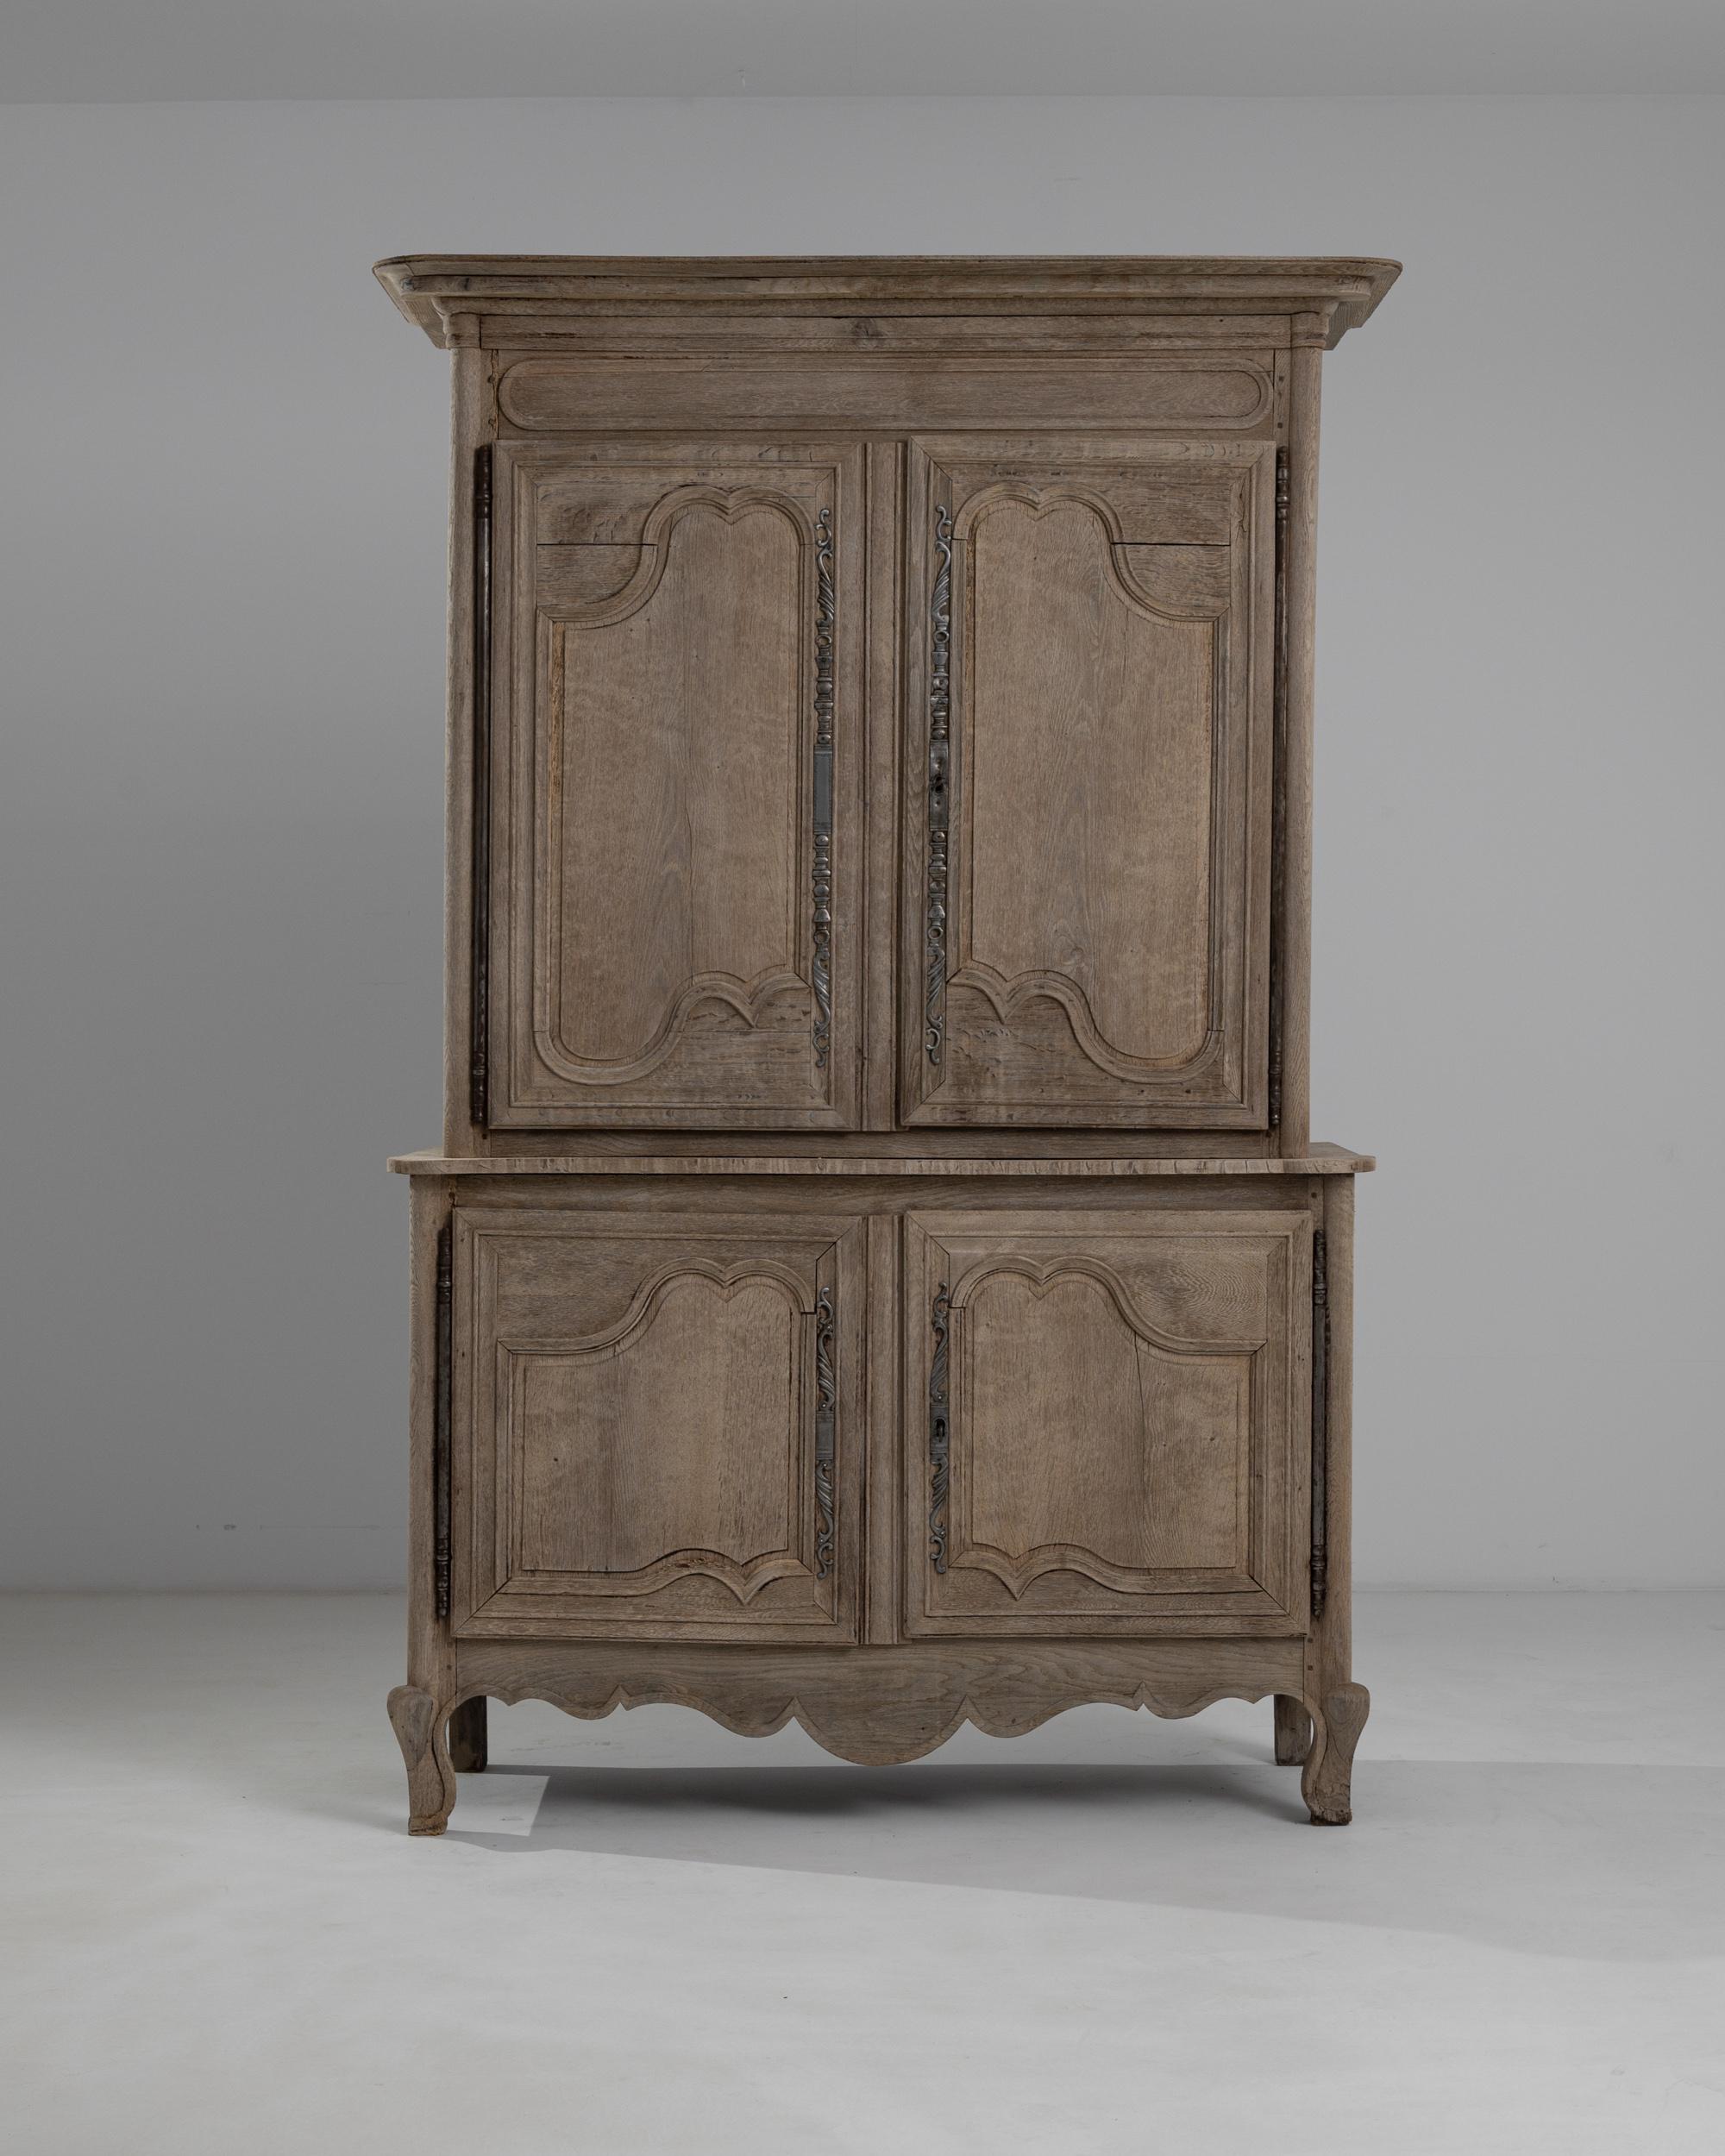 The ashen hue of the bleached oak accentuates the grandeur of this vintage buffet ‘a deux corps’ handcrafted in France circa 1850. Crowned with a molded cornice, this chest boasts deep curvilinear carvings of the panel doors echoed in the waves of